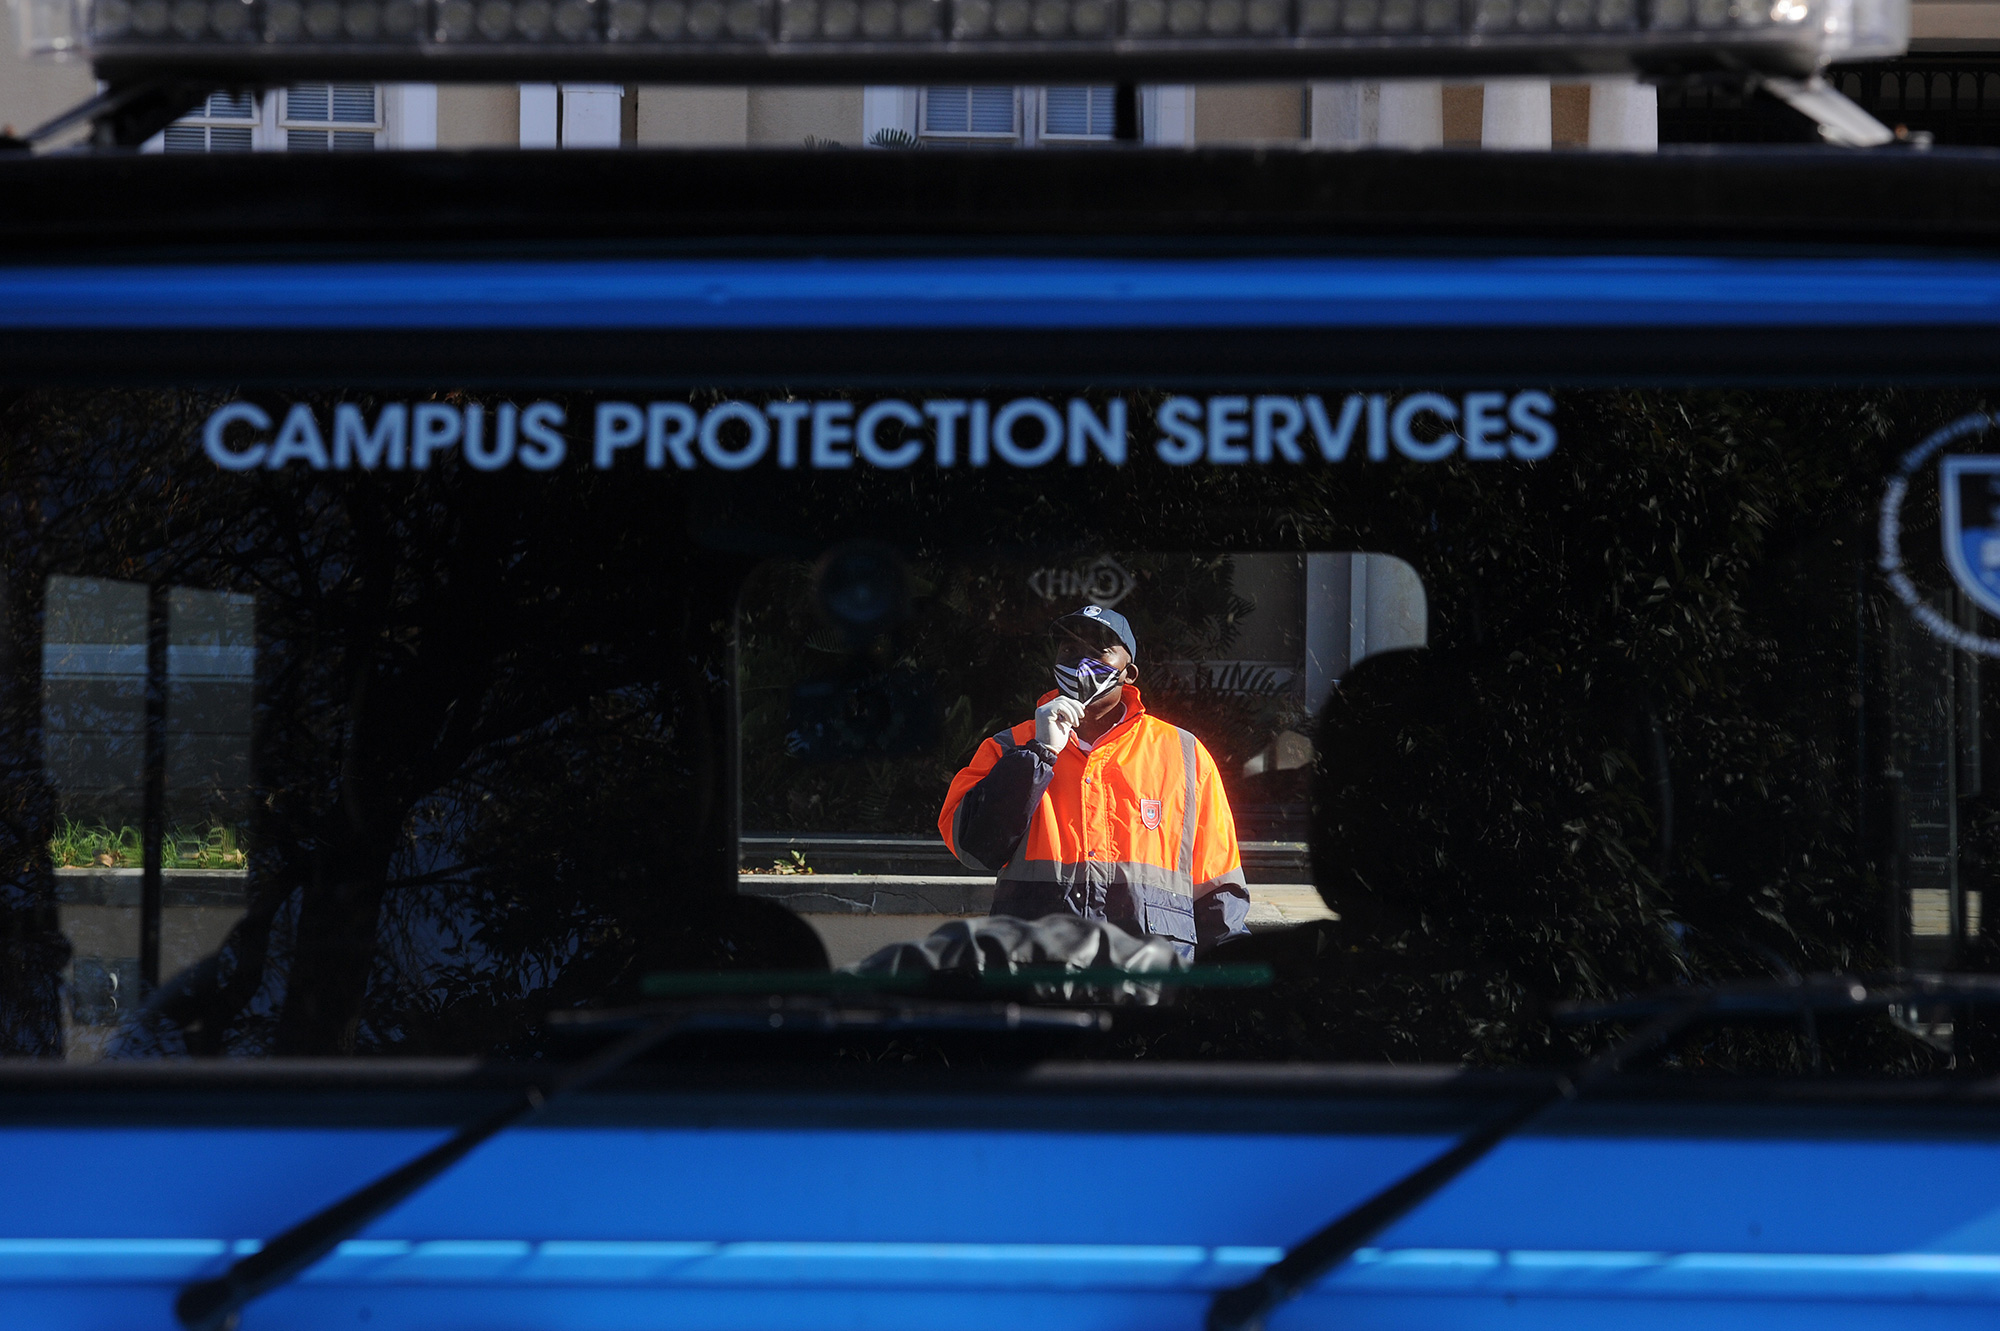 Campus Protection Services (CPS) oversees safety and security at UCT